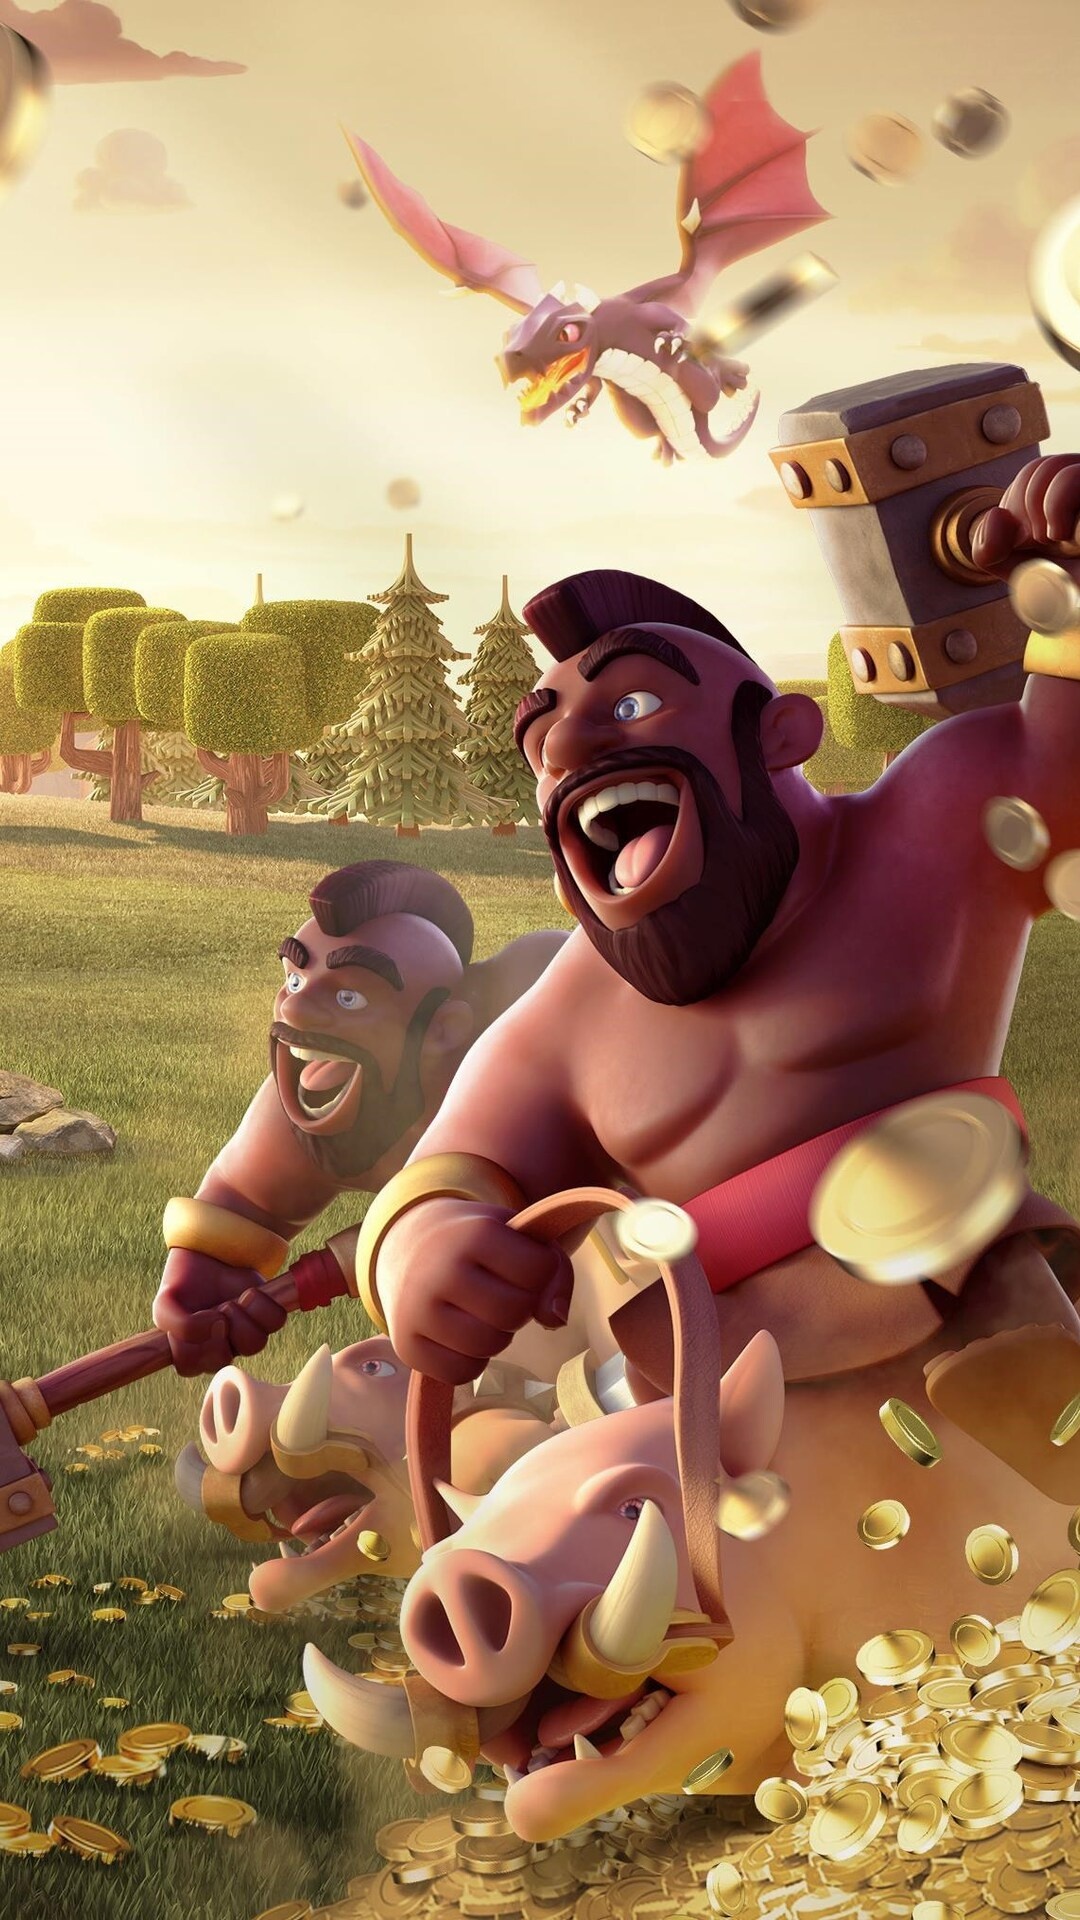 Clash of Clans: Hog Rider, A melee troop known for his ability to jump over walls. 1080x1920 Full HD Background.